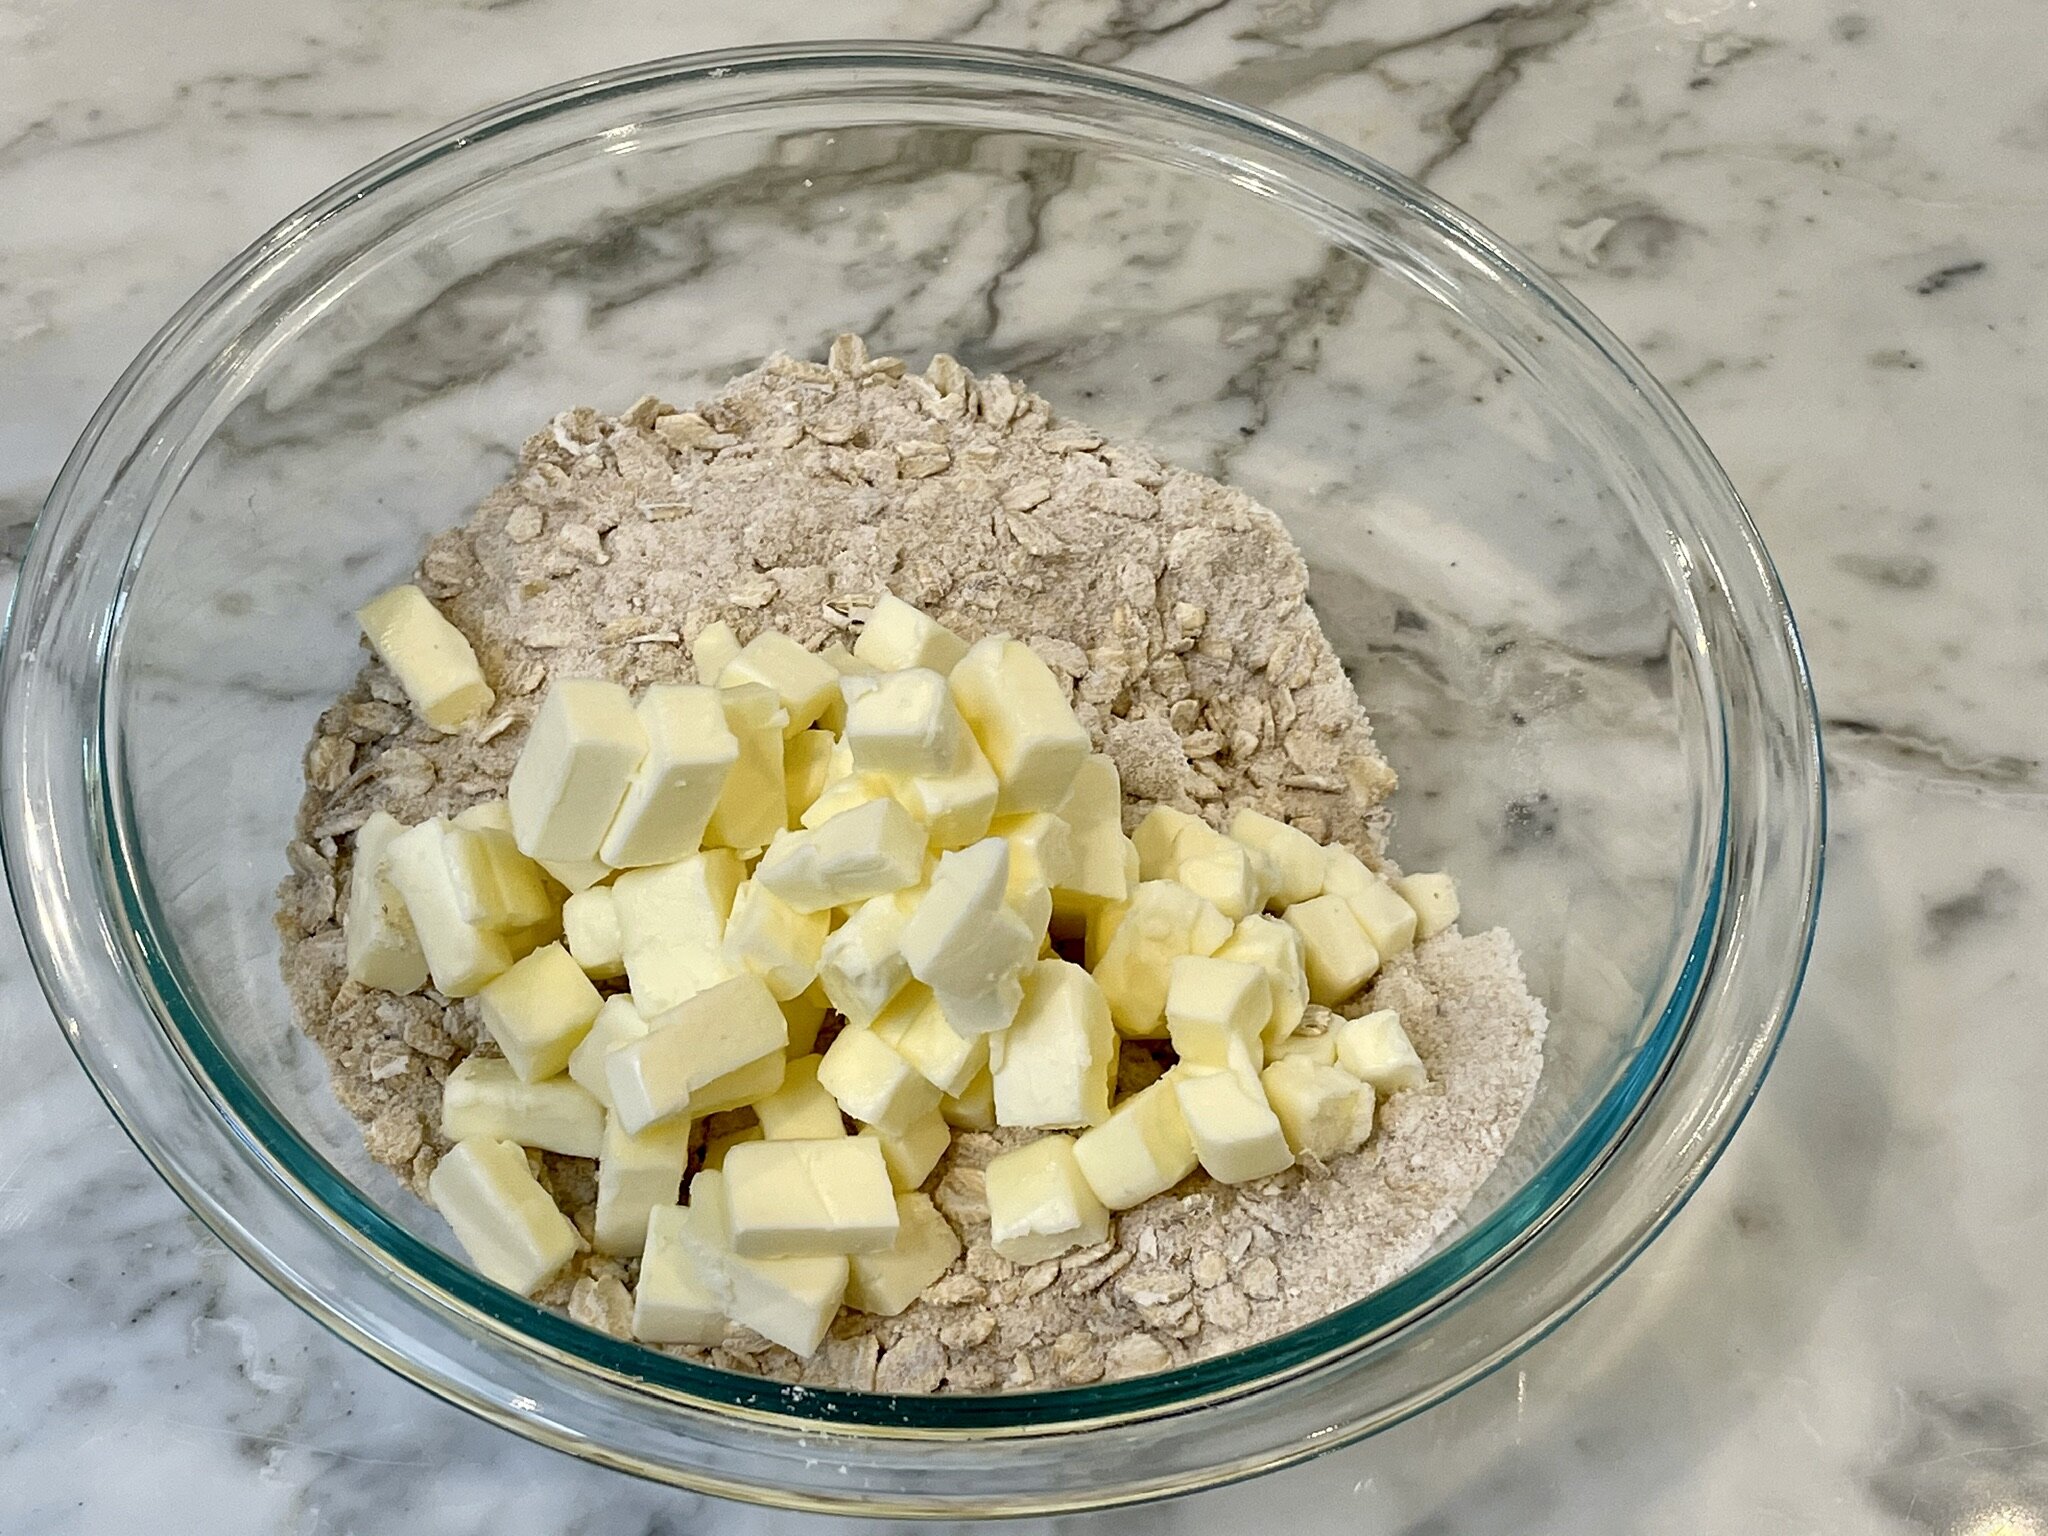 Add cubes to oats.